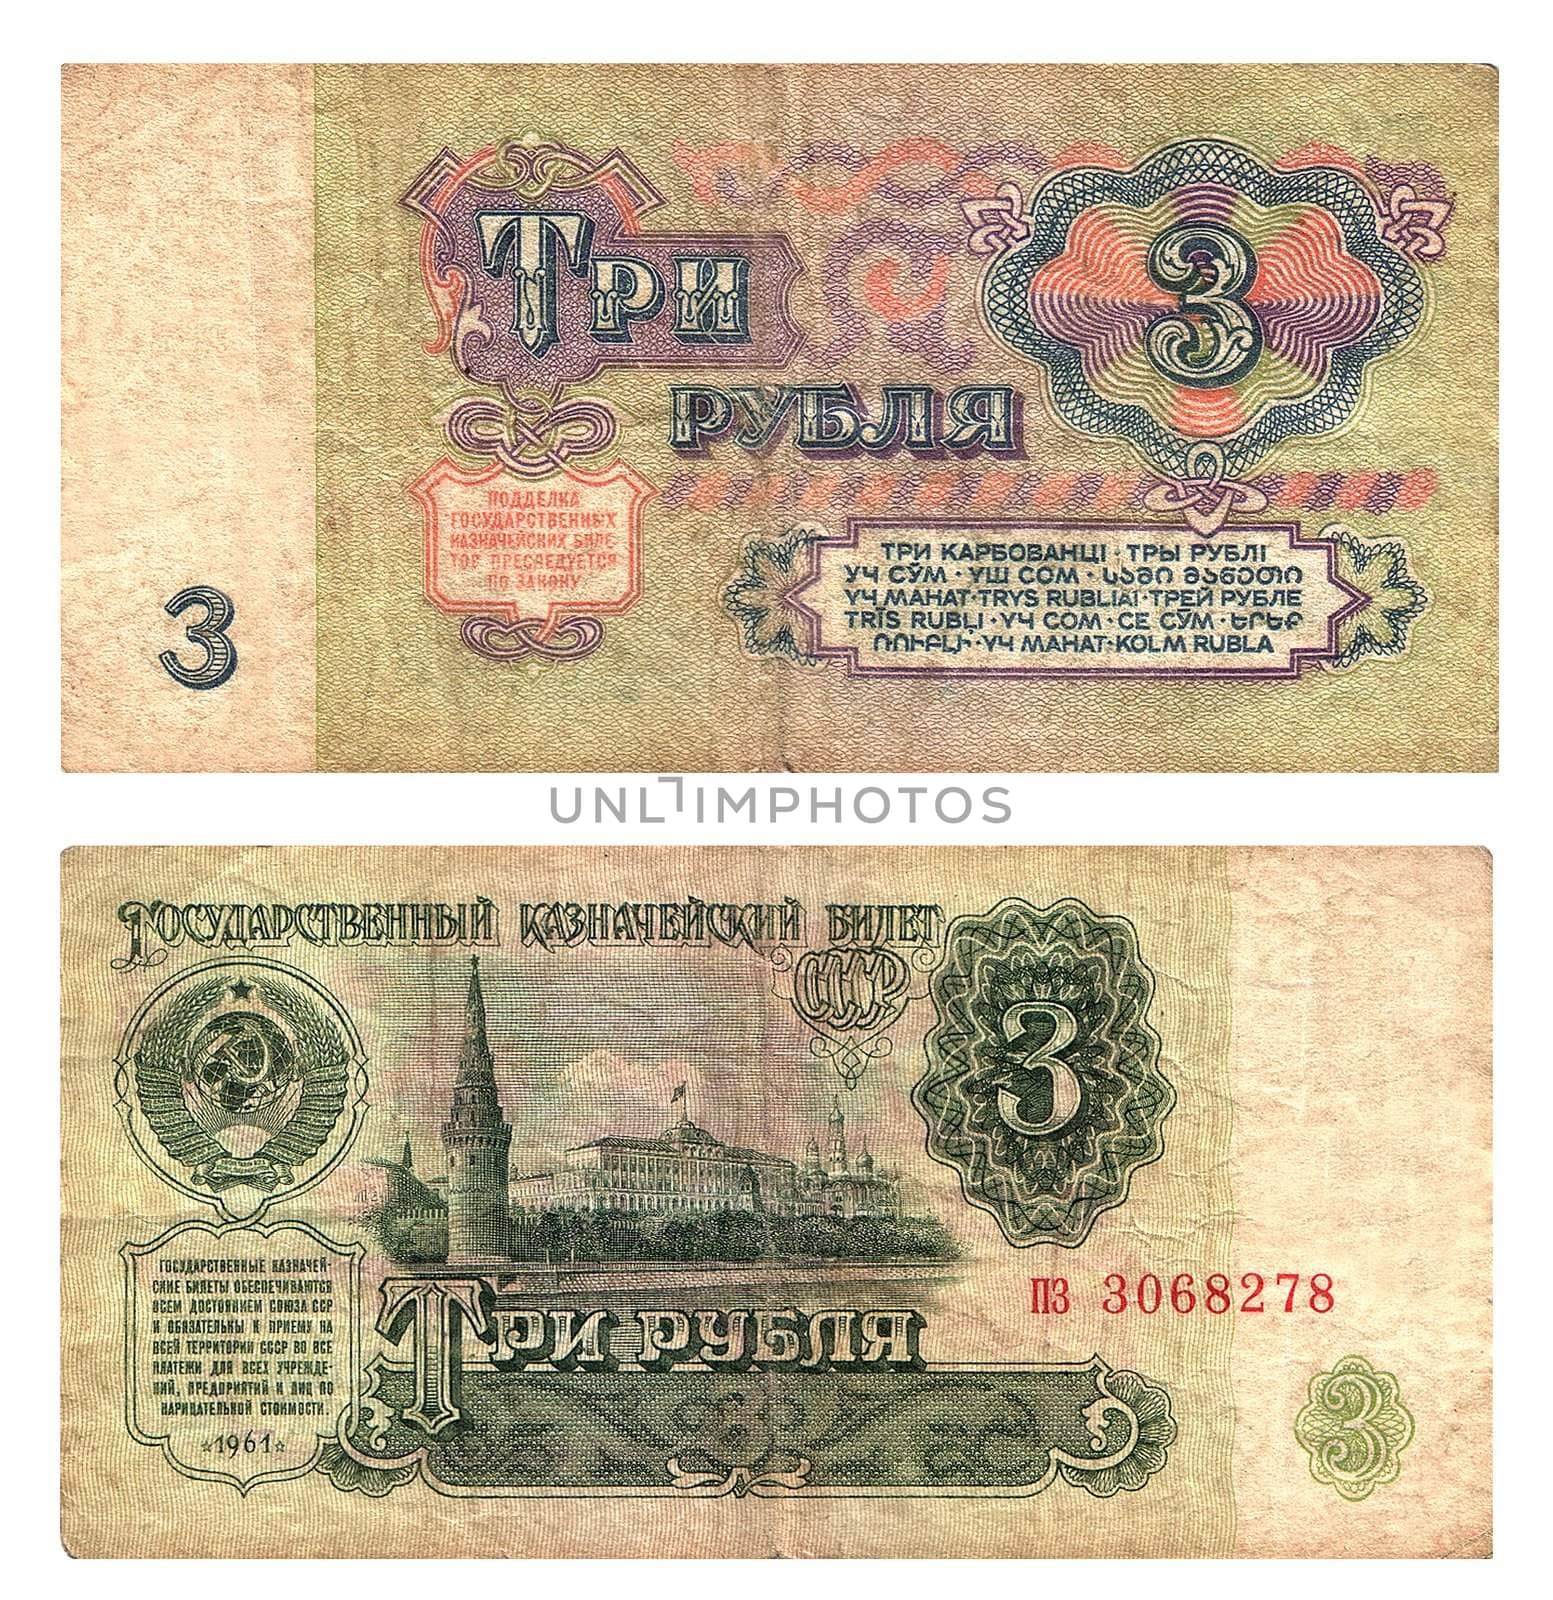 Paper money face value 3 rouble of old design
